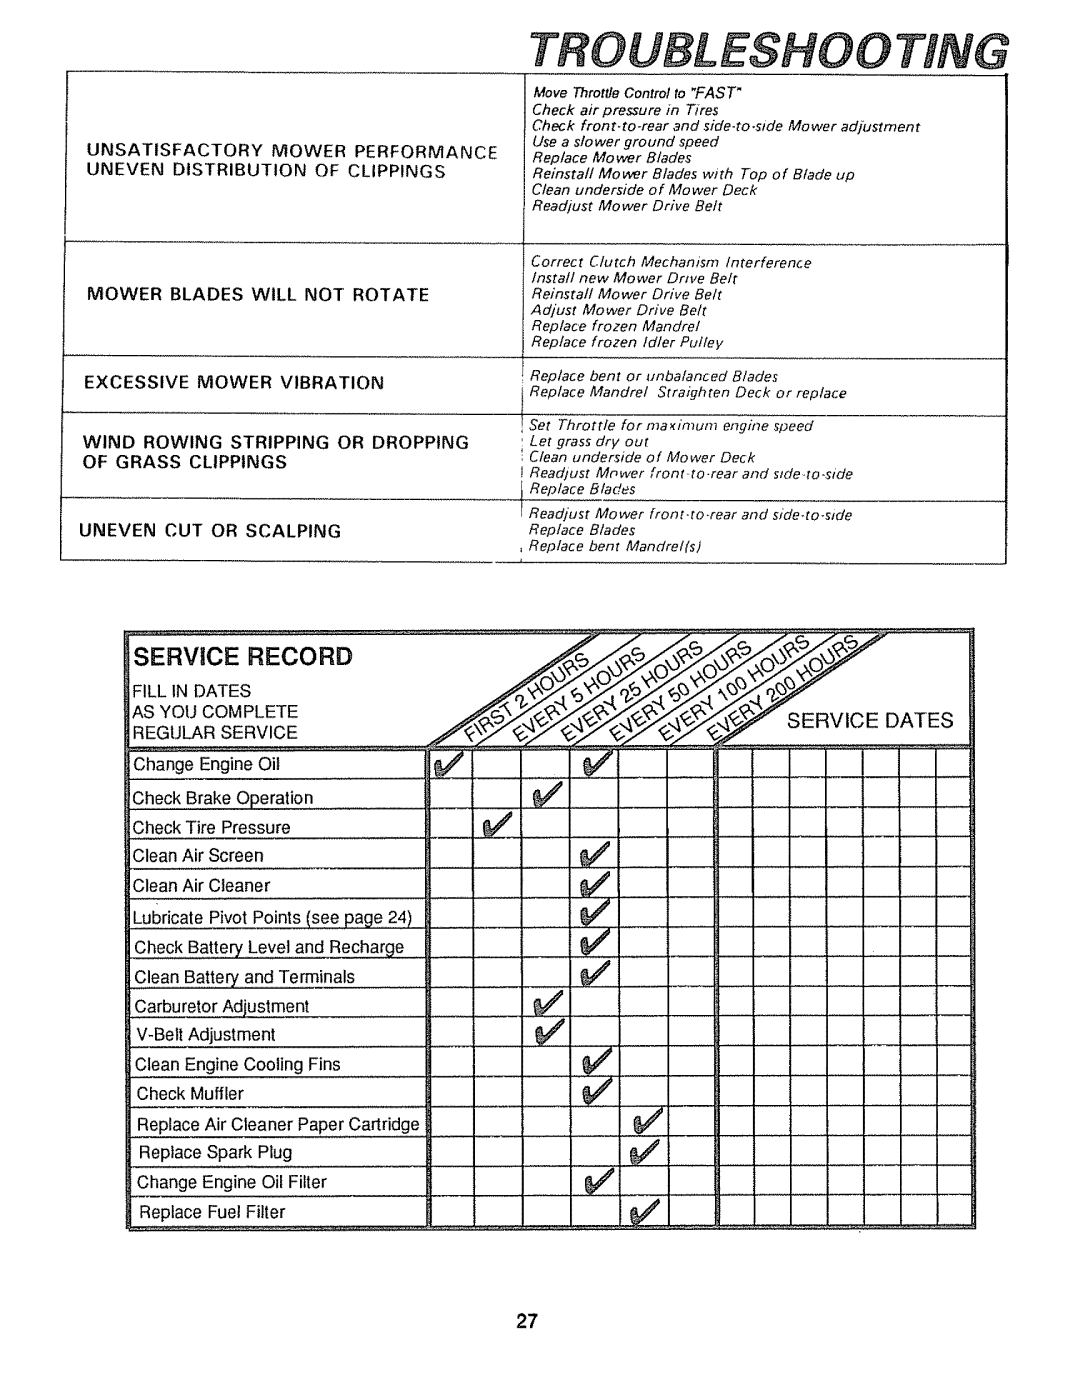 Sears 917.25446, 917.25004 owner manual Troubleshooting, Fill in Dates AS YOU Complete Regular Service 